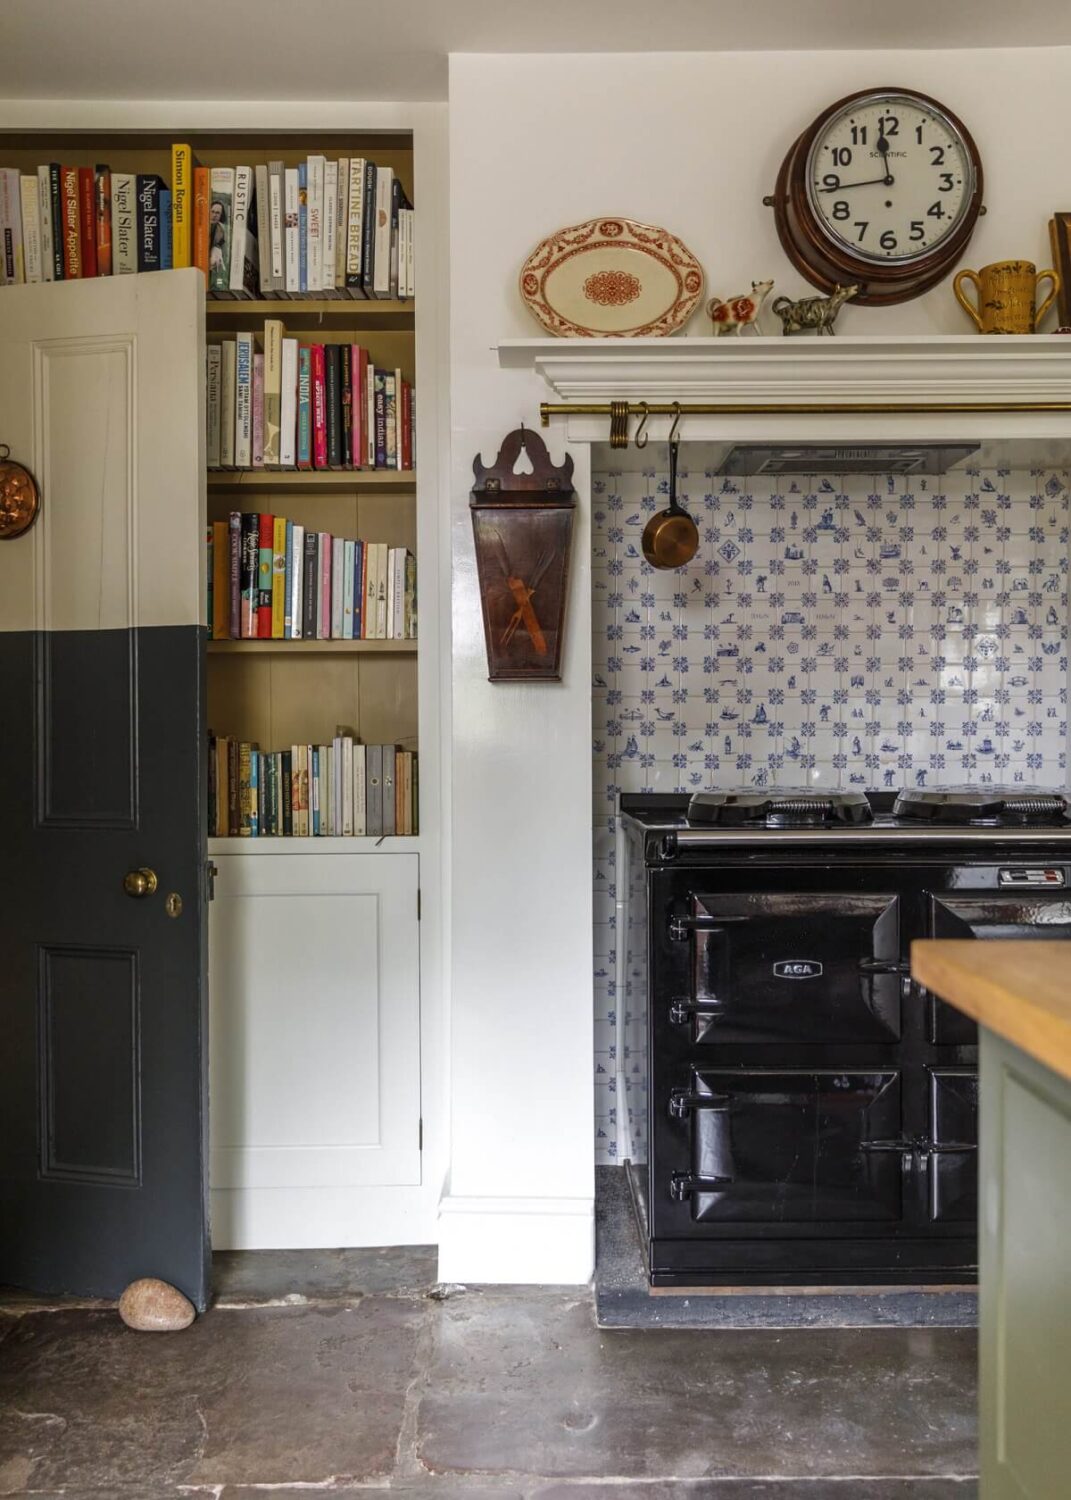 kitchen-stove-english-country-house-nordroom